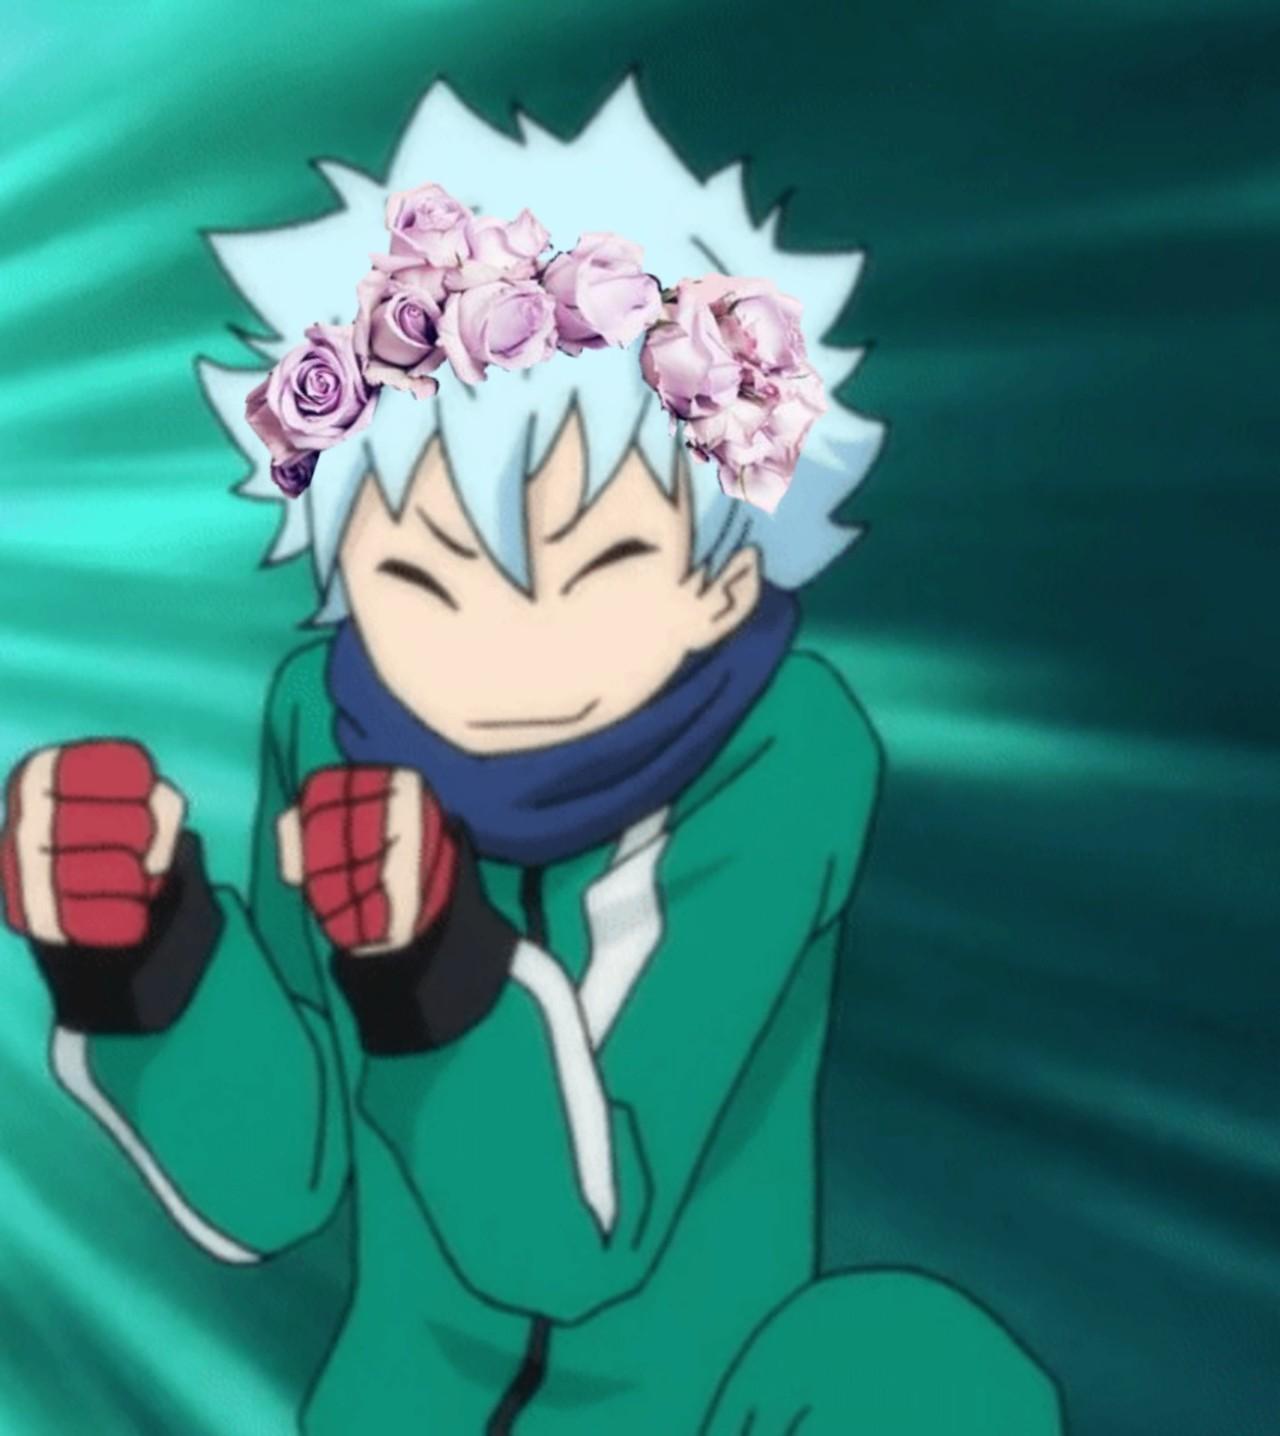 Anime Characters in Flower Crowns